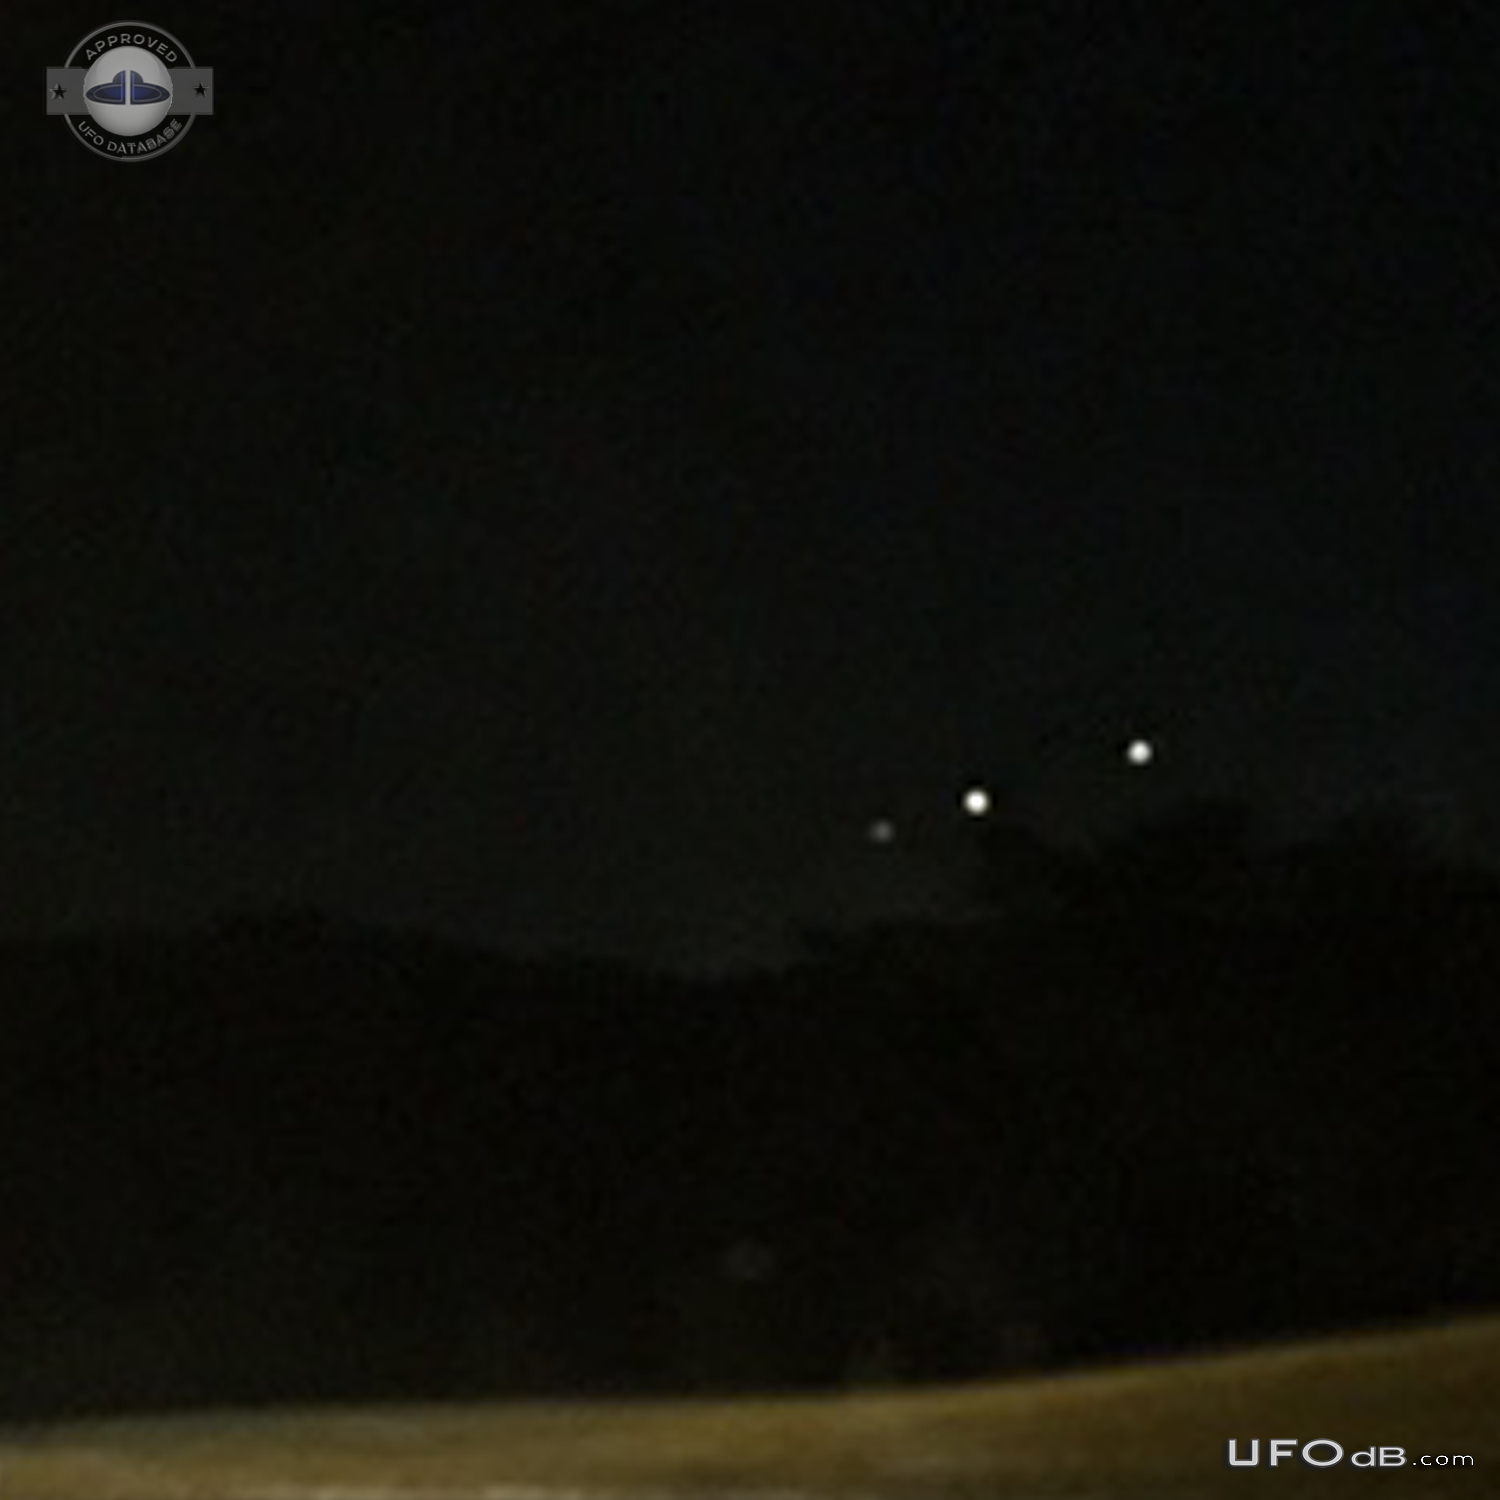 Perfect line of hovering UFOs low to ground - Hazelwood Missouri 2015 UFO Picture #737-5